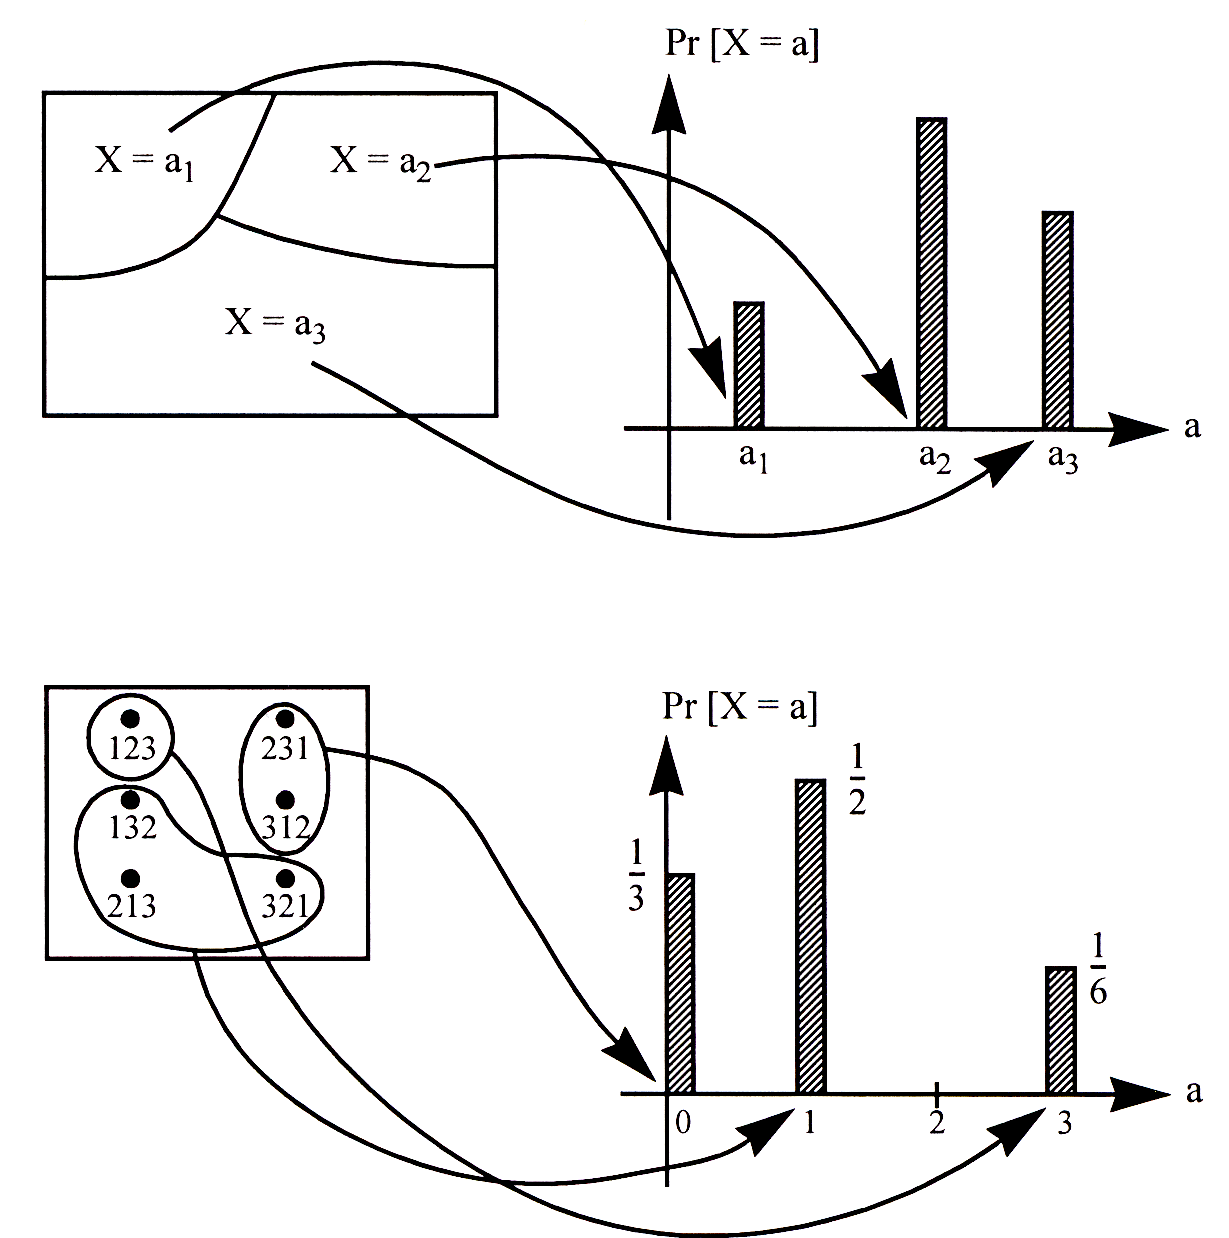 Figure 2: Visualization of how the distribution of a random variable is defined.